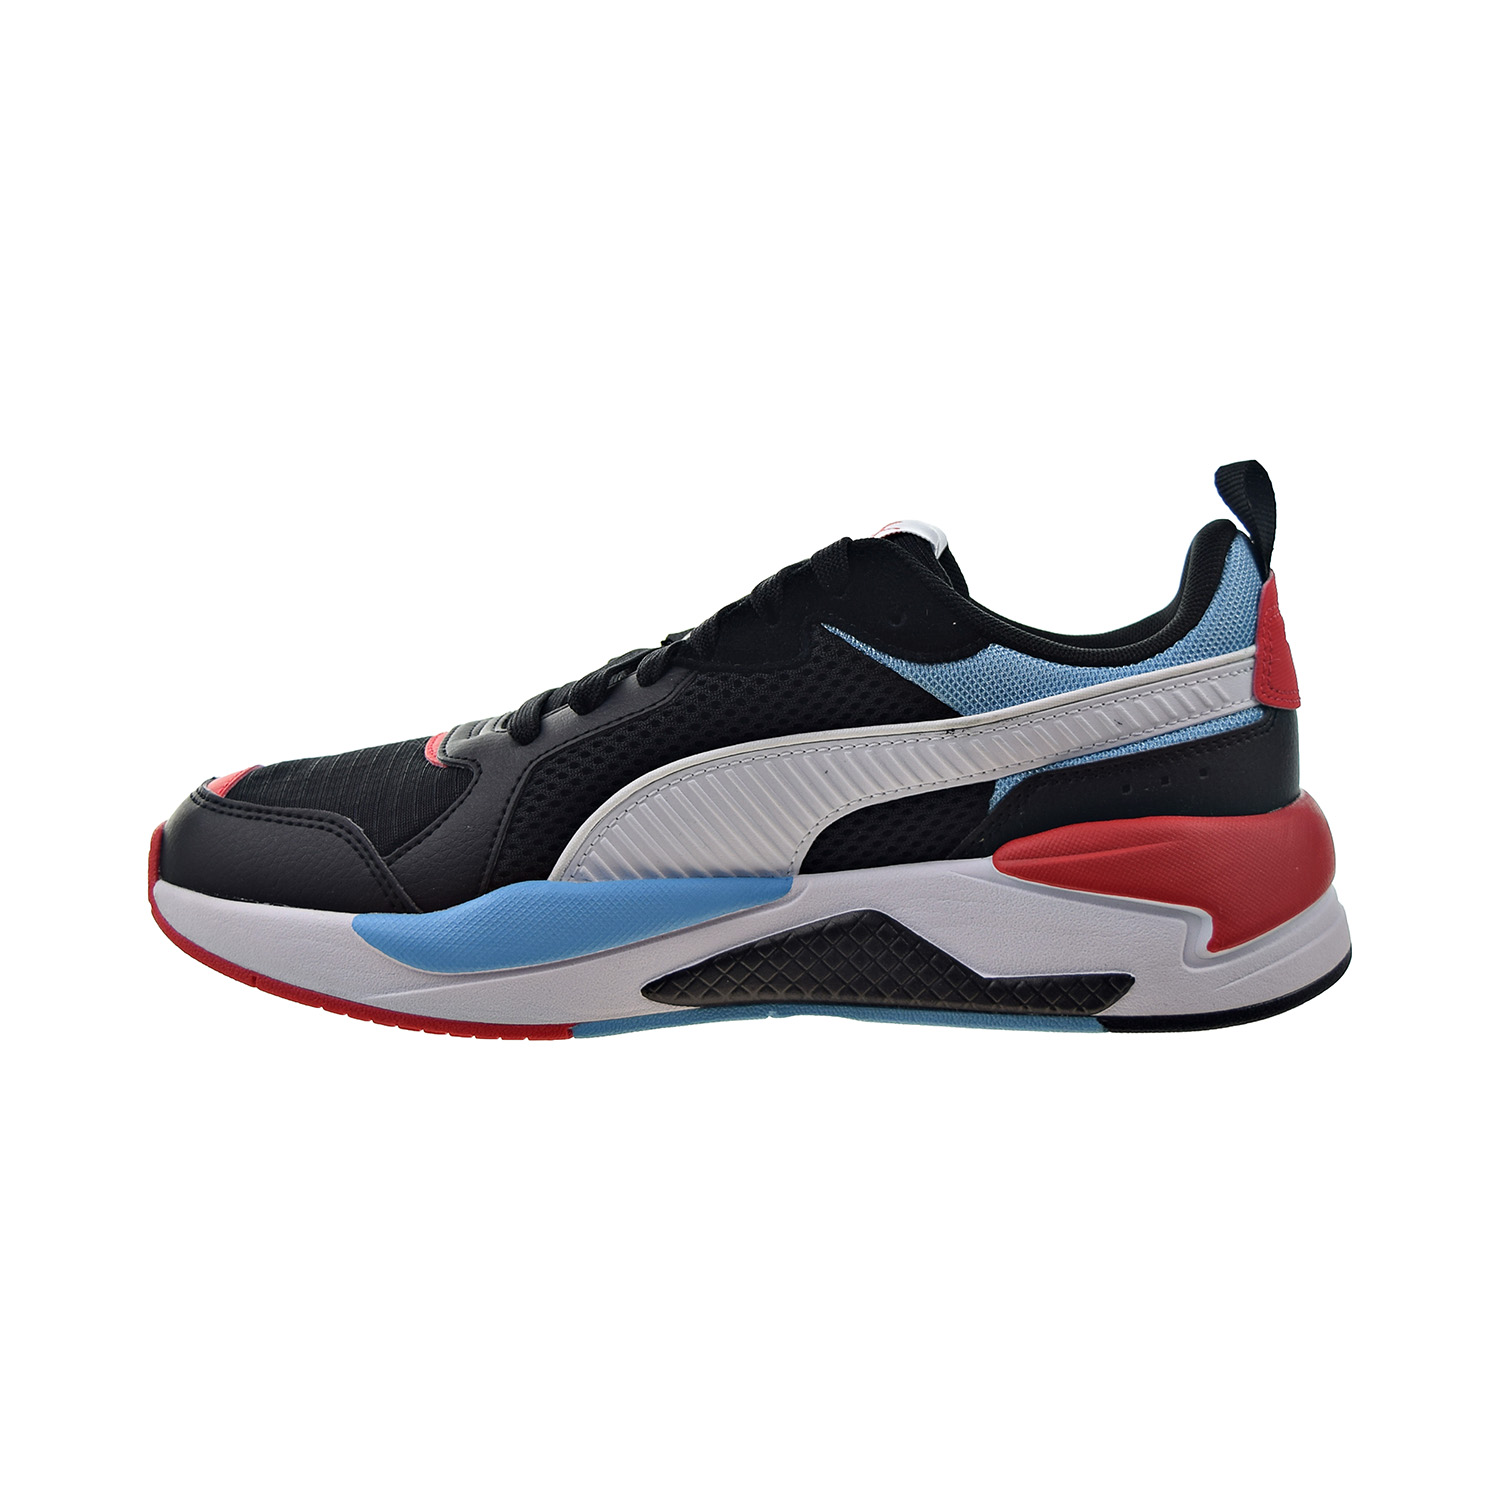 Puma X-Ray Color Block Men's Shoes Black-White-Blue-Red 373582-01 - image 4 of 6